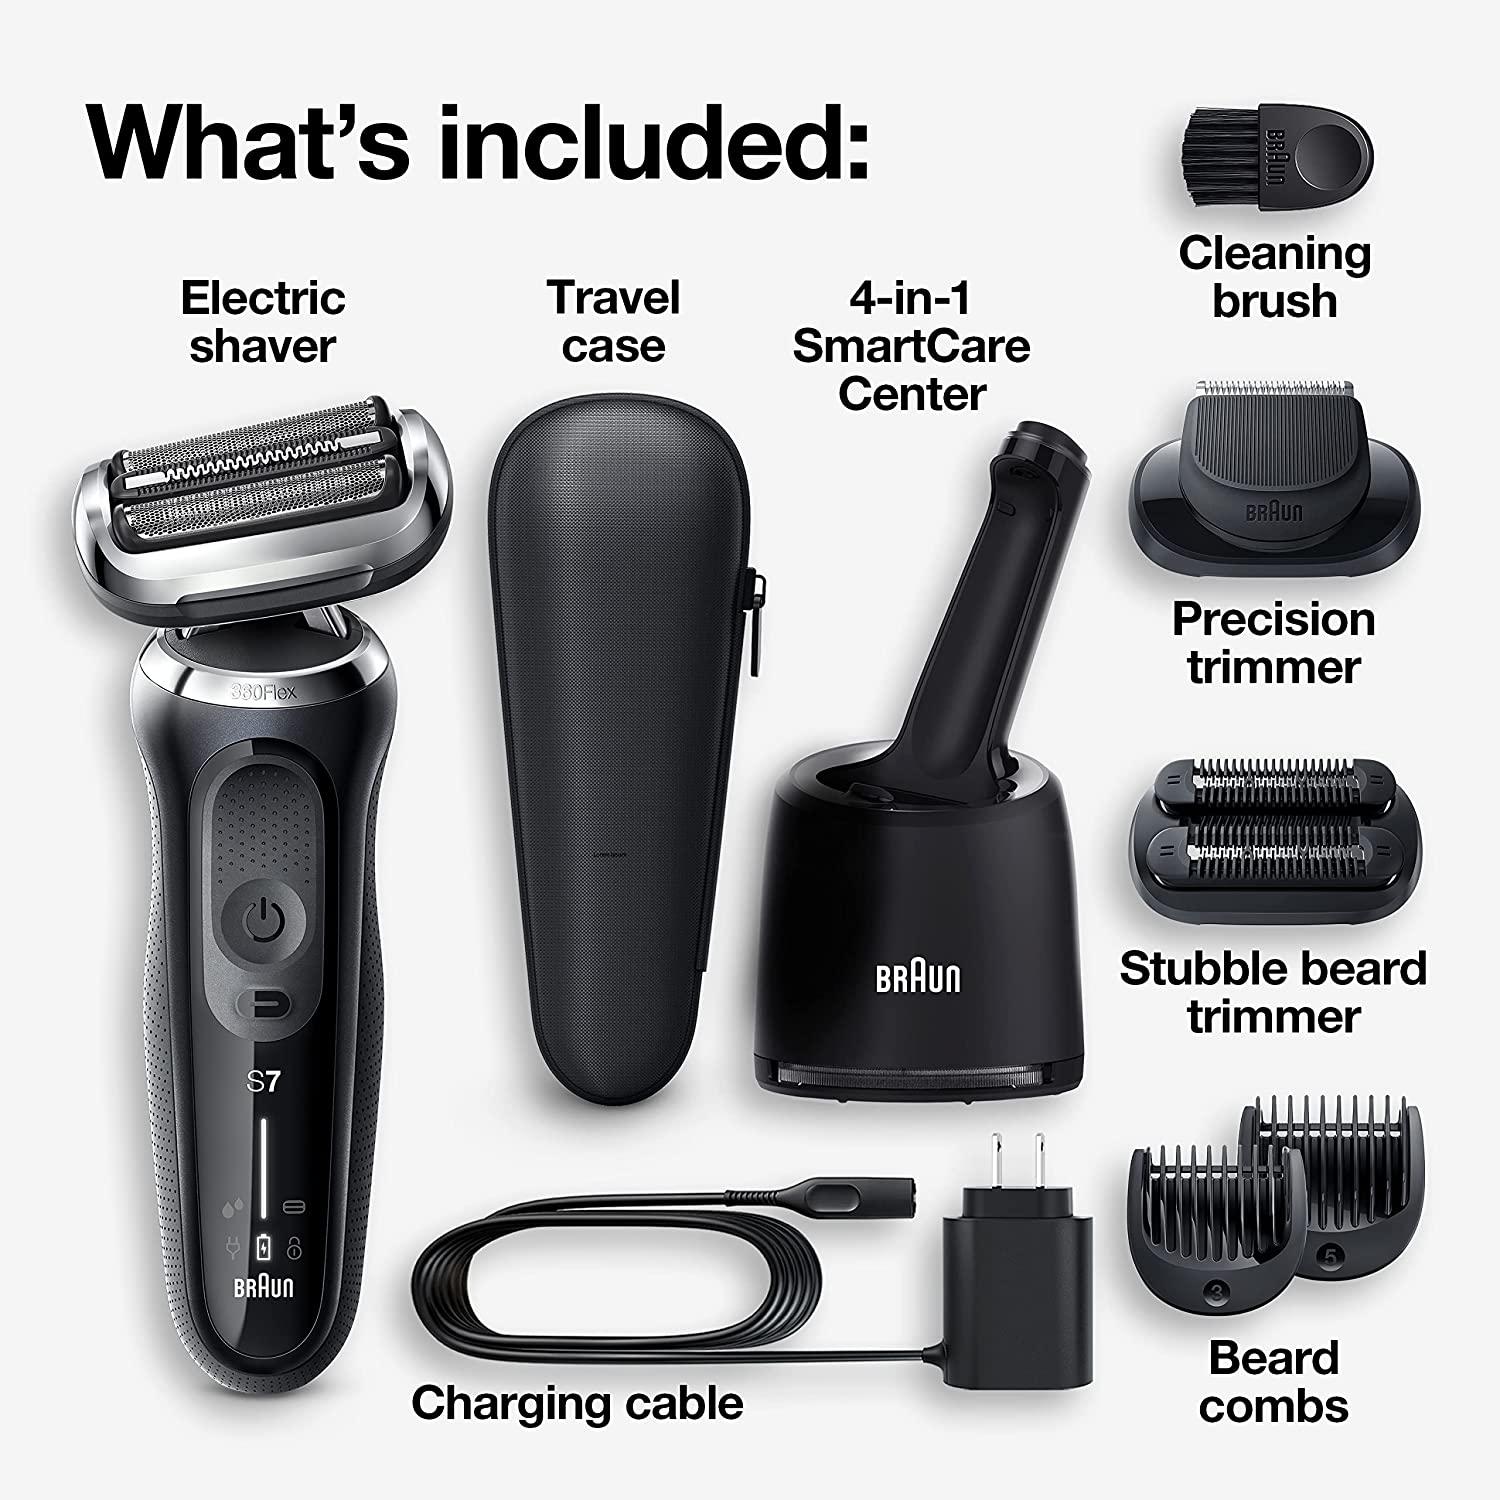 Braun Electric Razor for Men, Series 7 7085cc 360 Flex Head Electric Shaver  with Beard Trimmer, Rechargeable, Wet & Dry, 4in1 SmartCare Center and  Travel Case